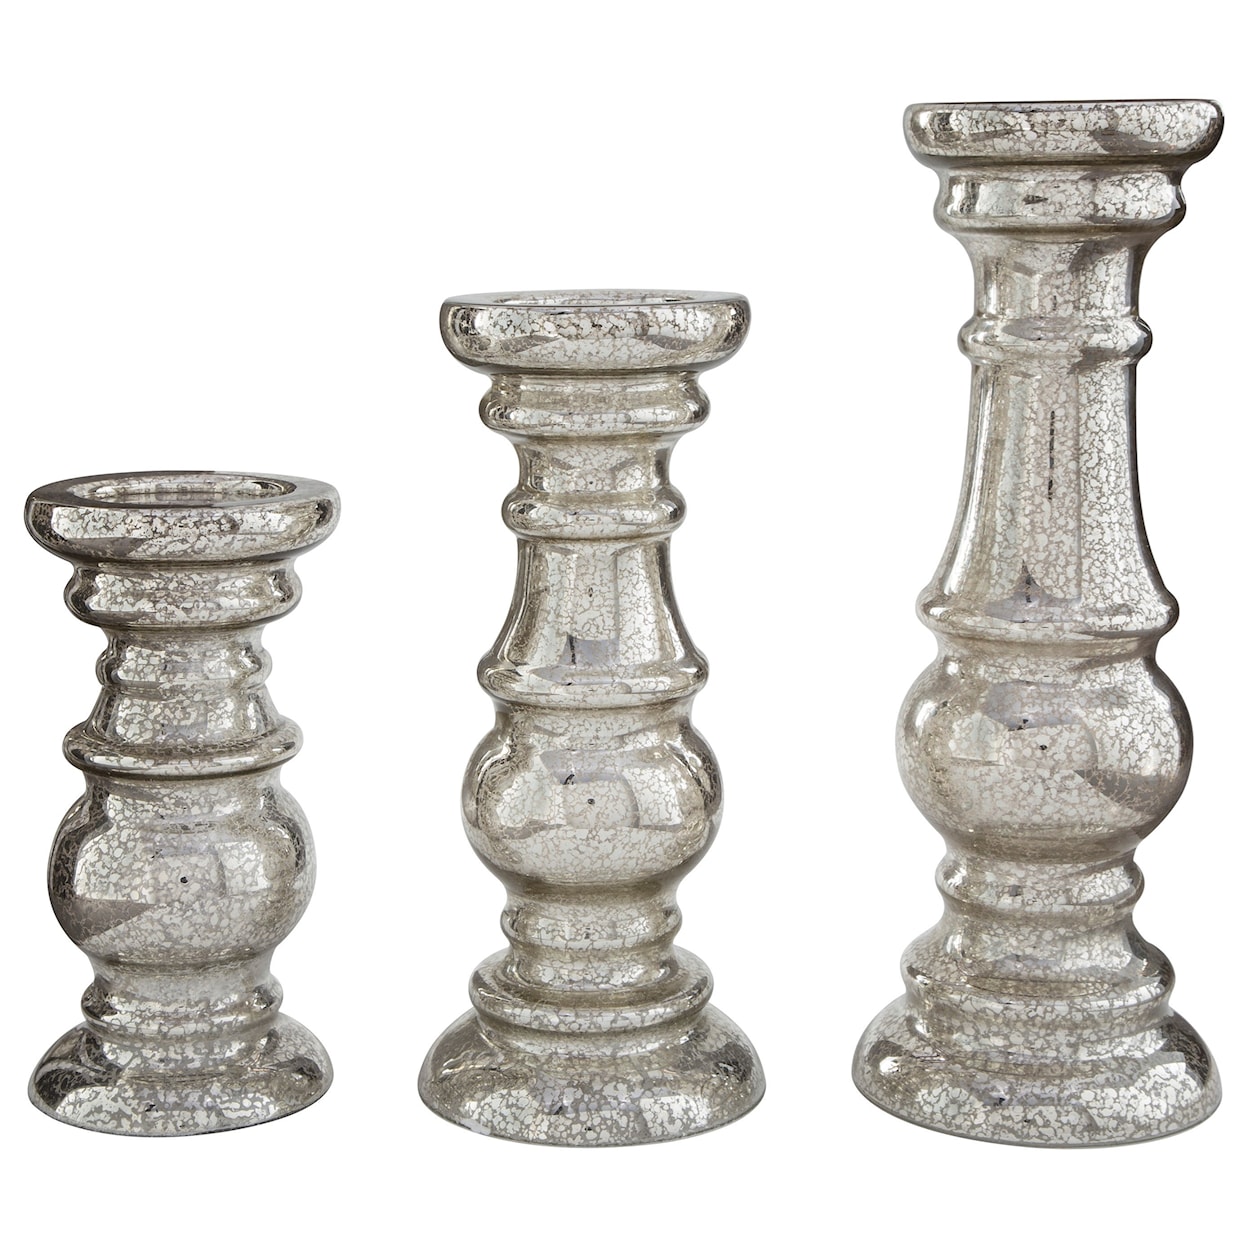 Signature Design by Ashley Accents Rosario Silver Finish Candle Holder Set